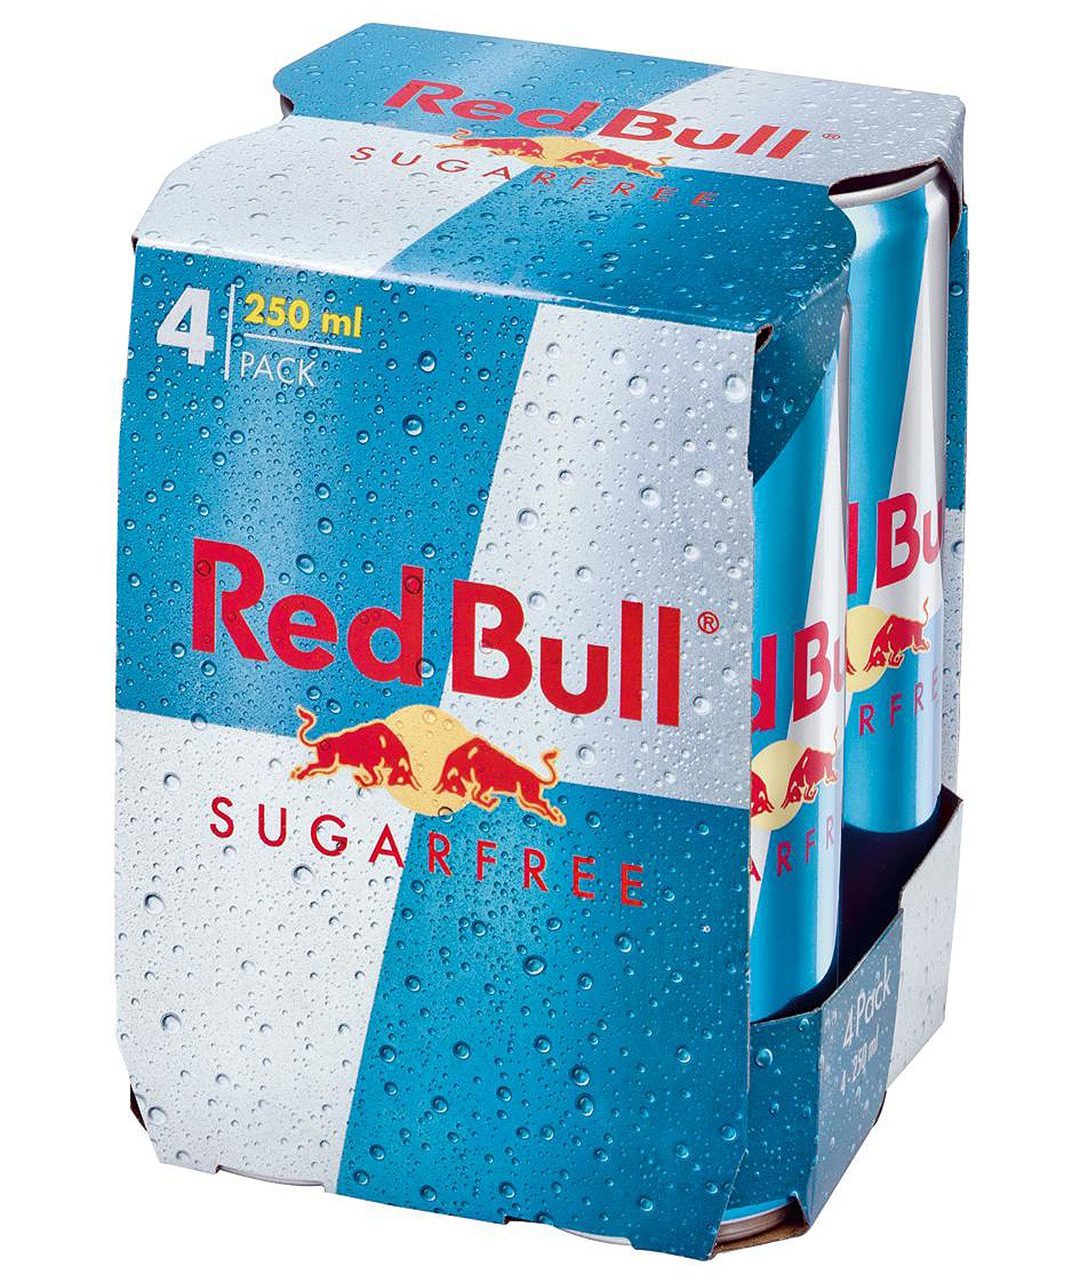 Red Bull has been pointing out the rising popularity of its sugar-free variants.